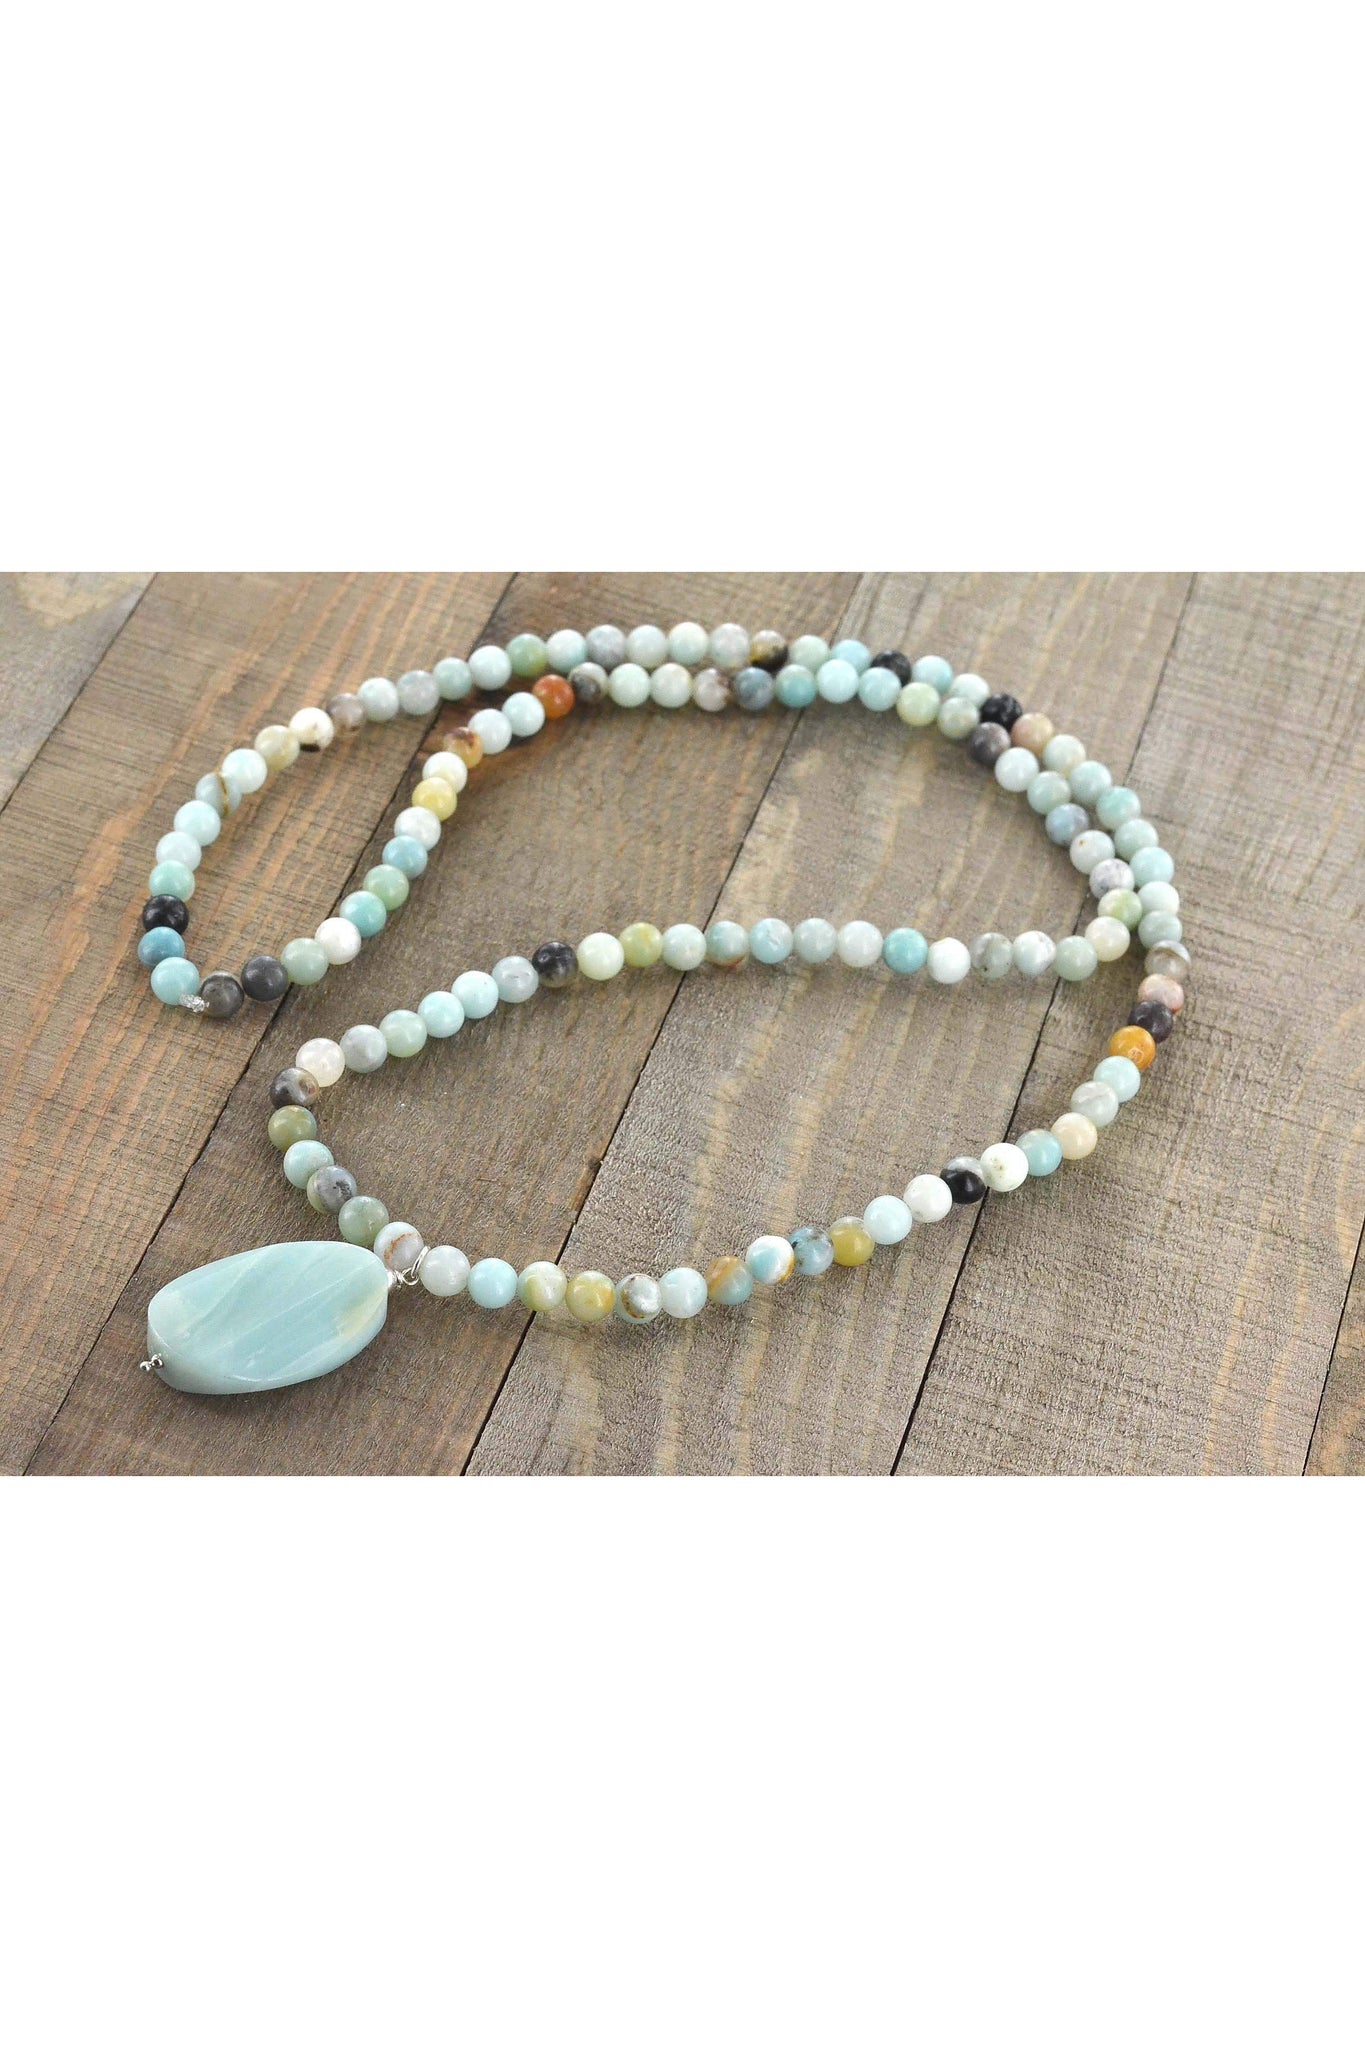 Amazonite Long Bead Necklace, 28 inches